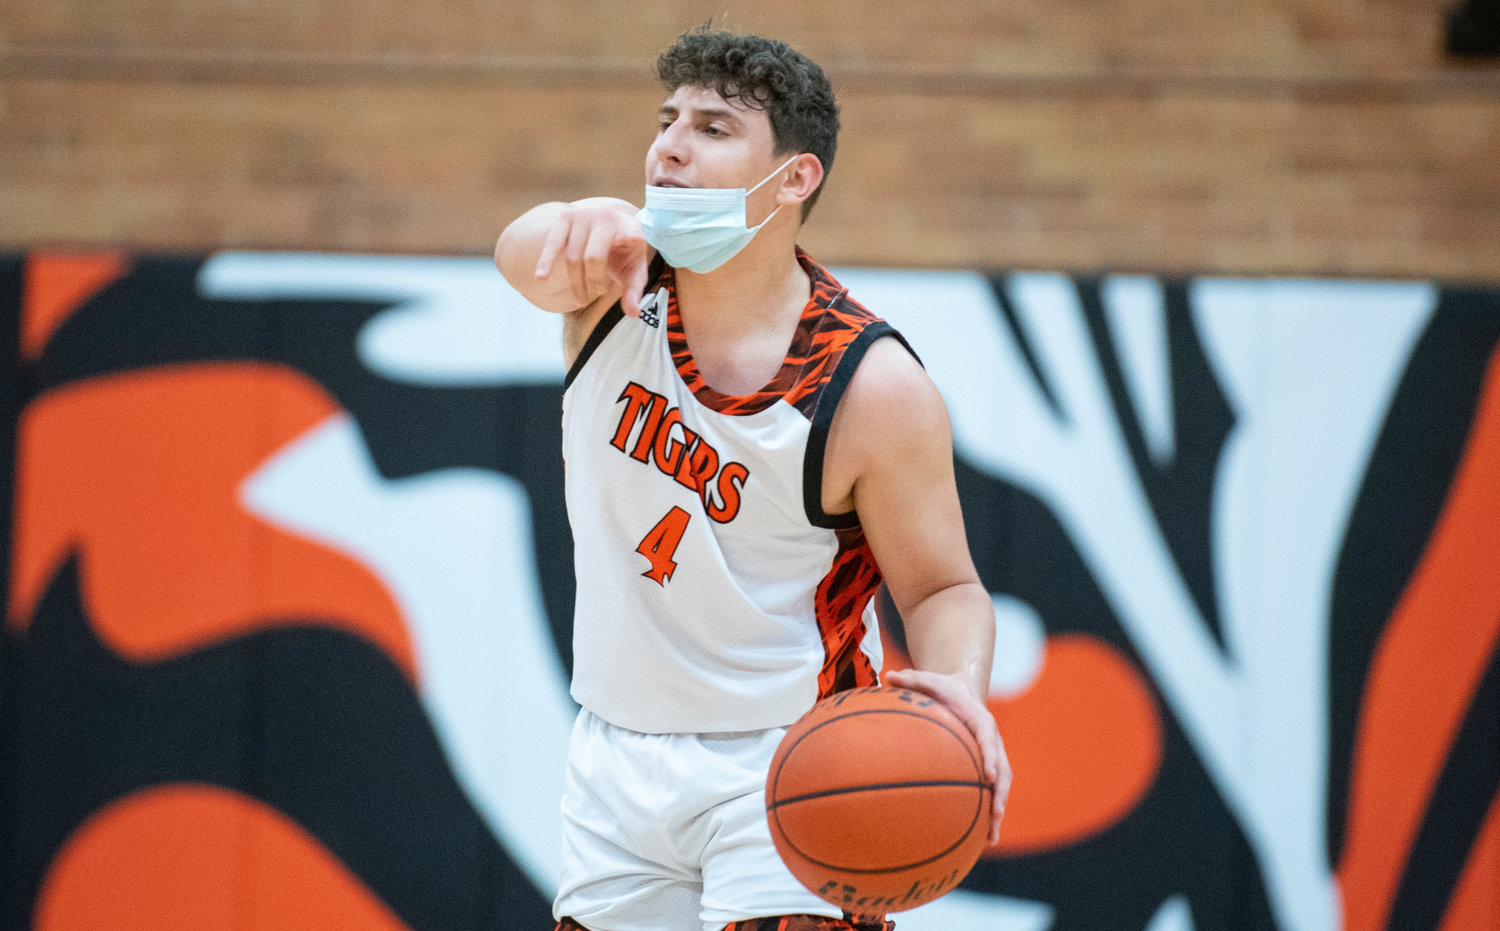 Centralia point guard Brady Hoyt calls out an offensive set against Tumwater.